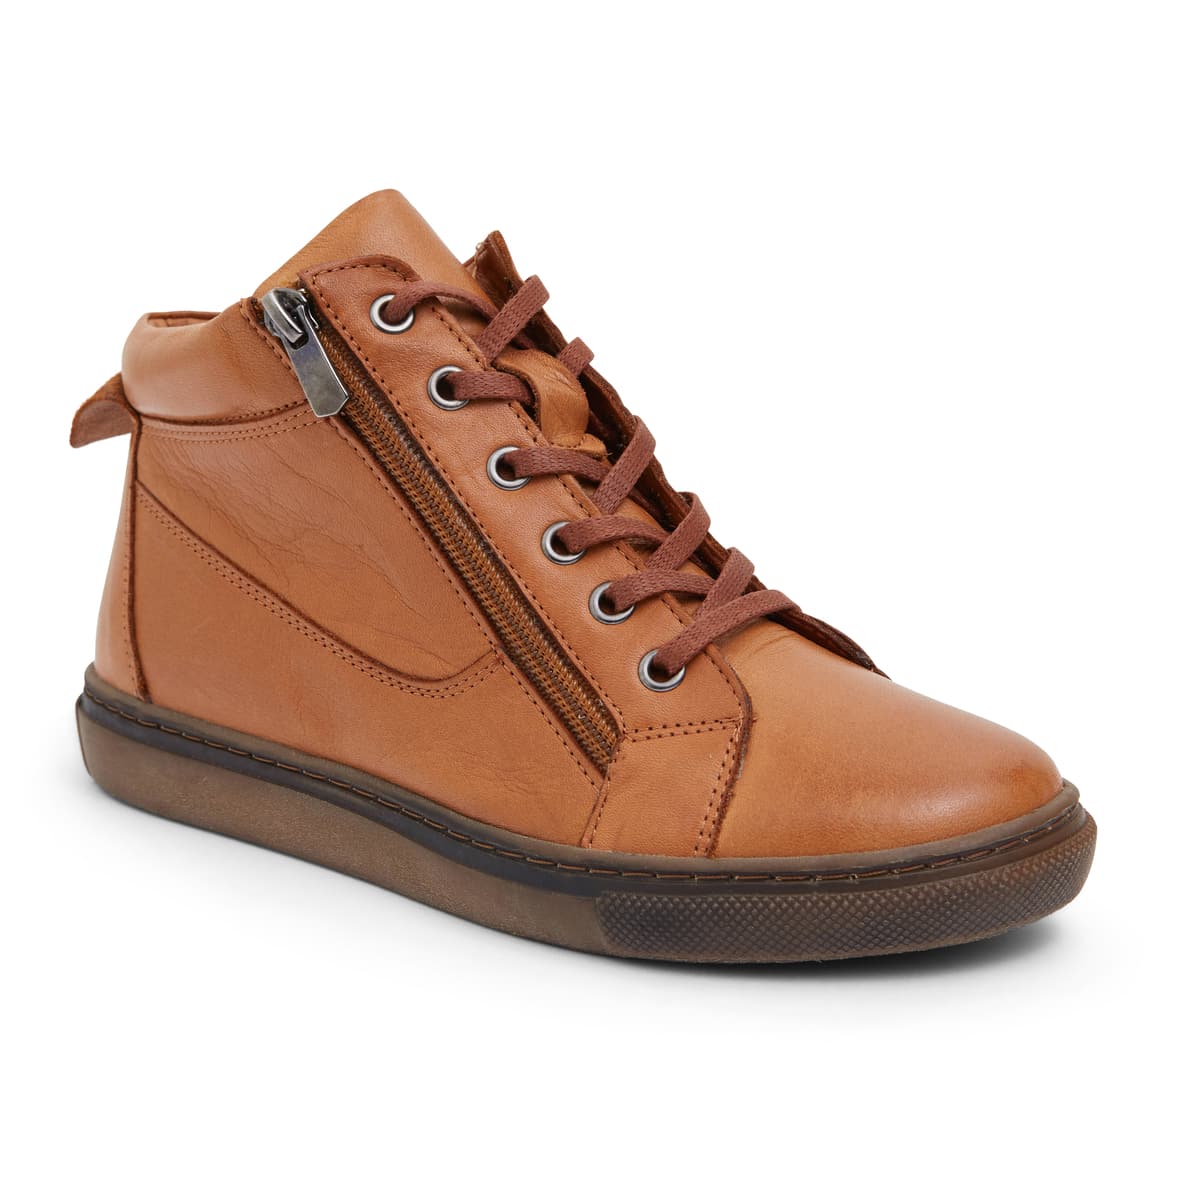 Wagner Boot in Tan Leather